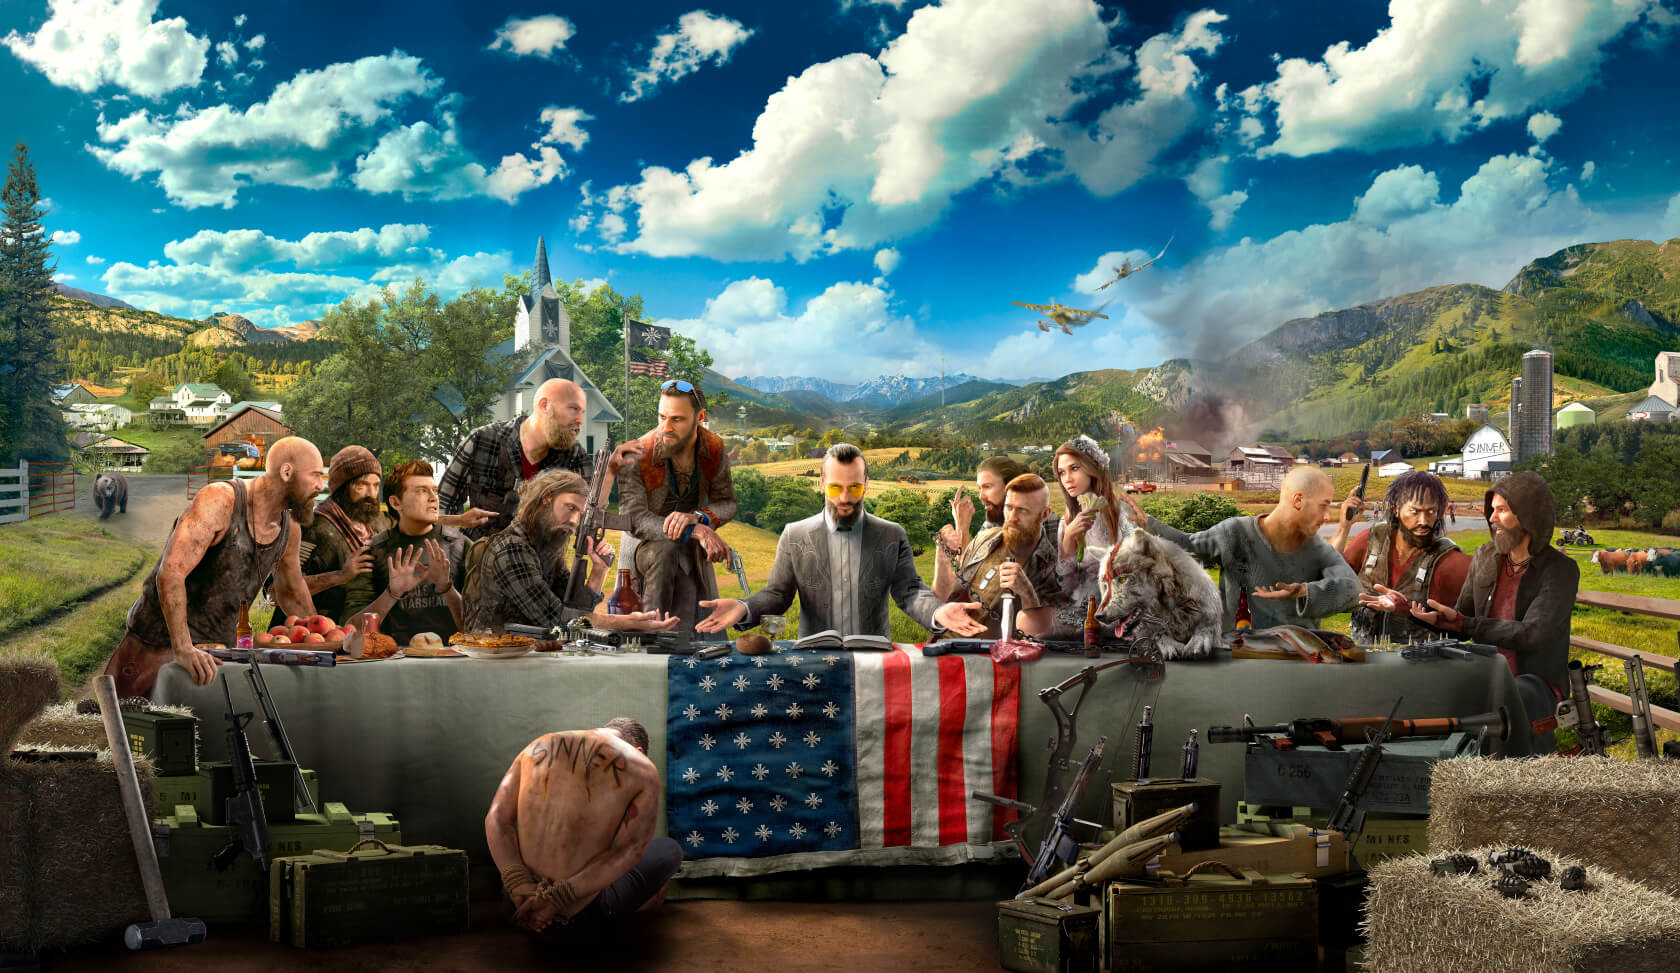 Ubisoft: Far Cry 5 is company's best-selling game this generation, Division 2 sells 10 times better on Uplay than predecessor